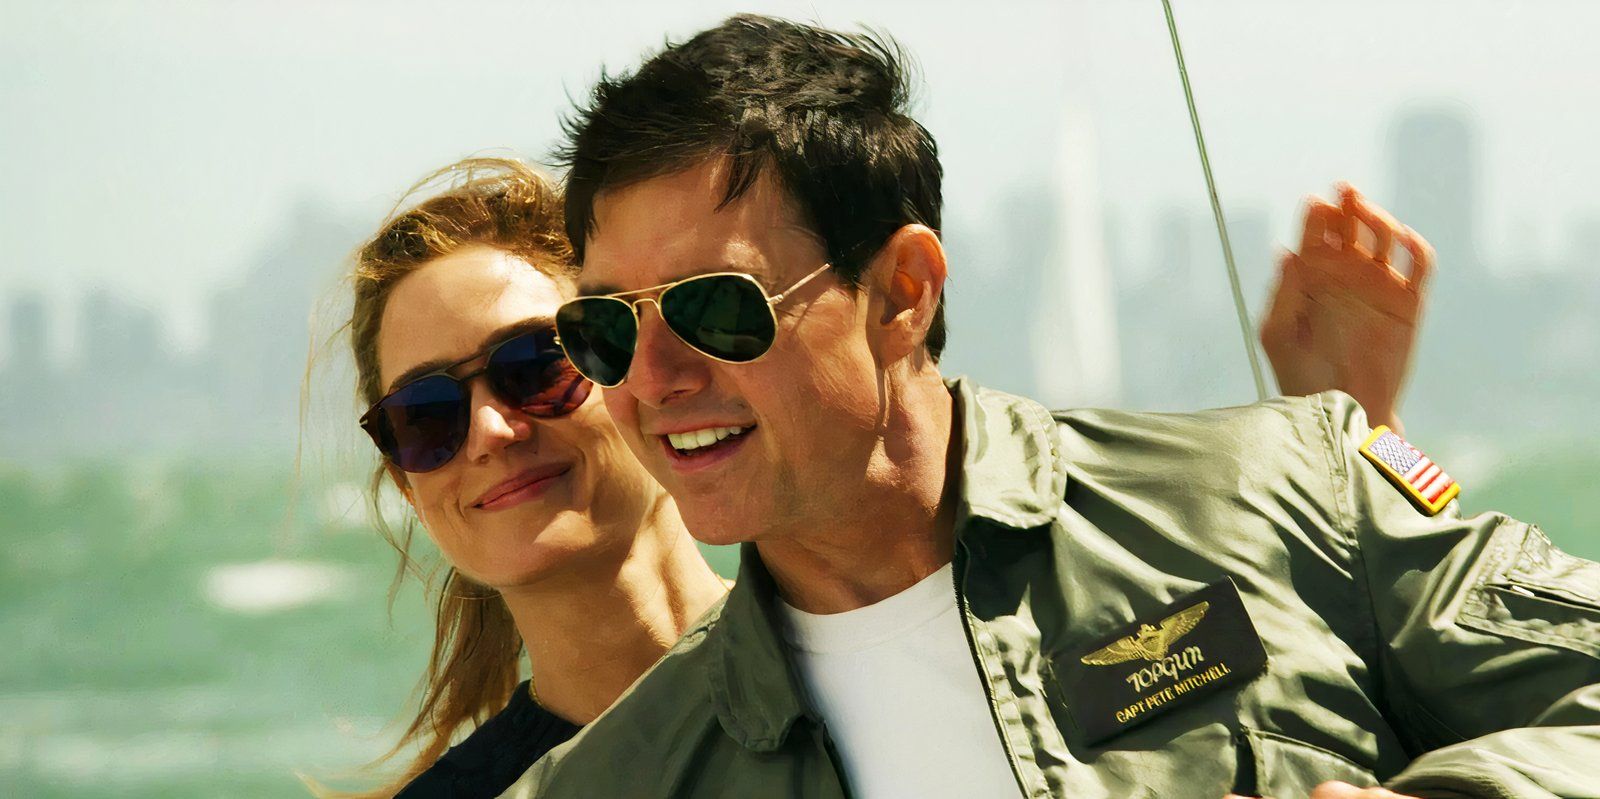 Tom Cruise and Jennifer Connelly on a sailboat in Top Gun Maverick